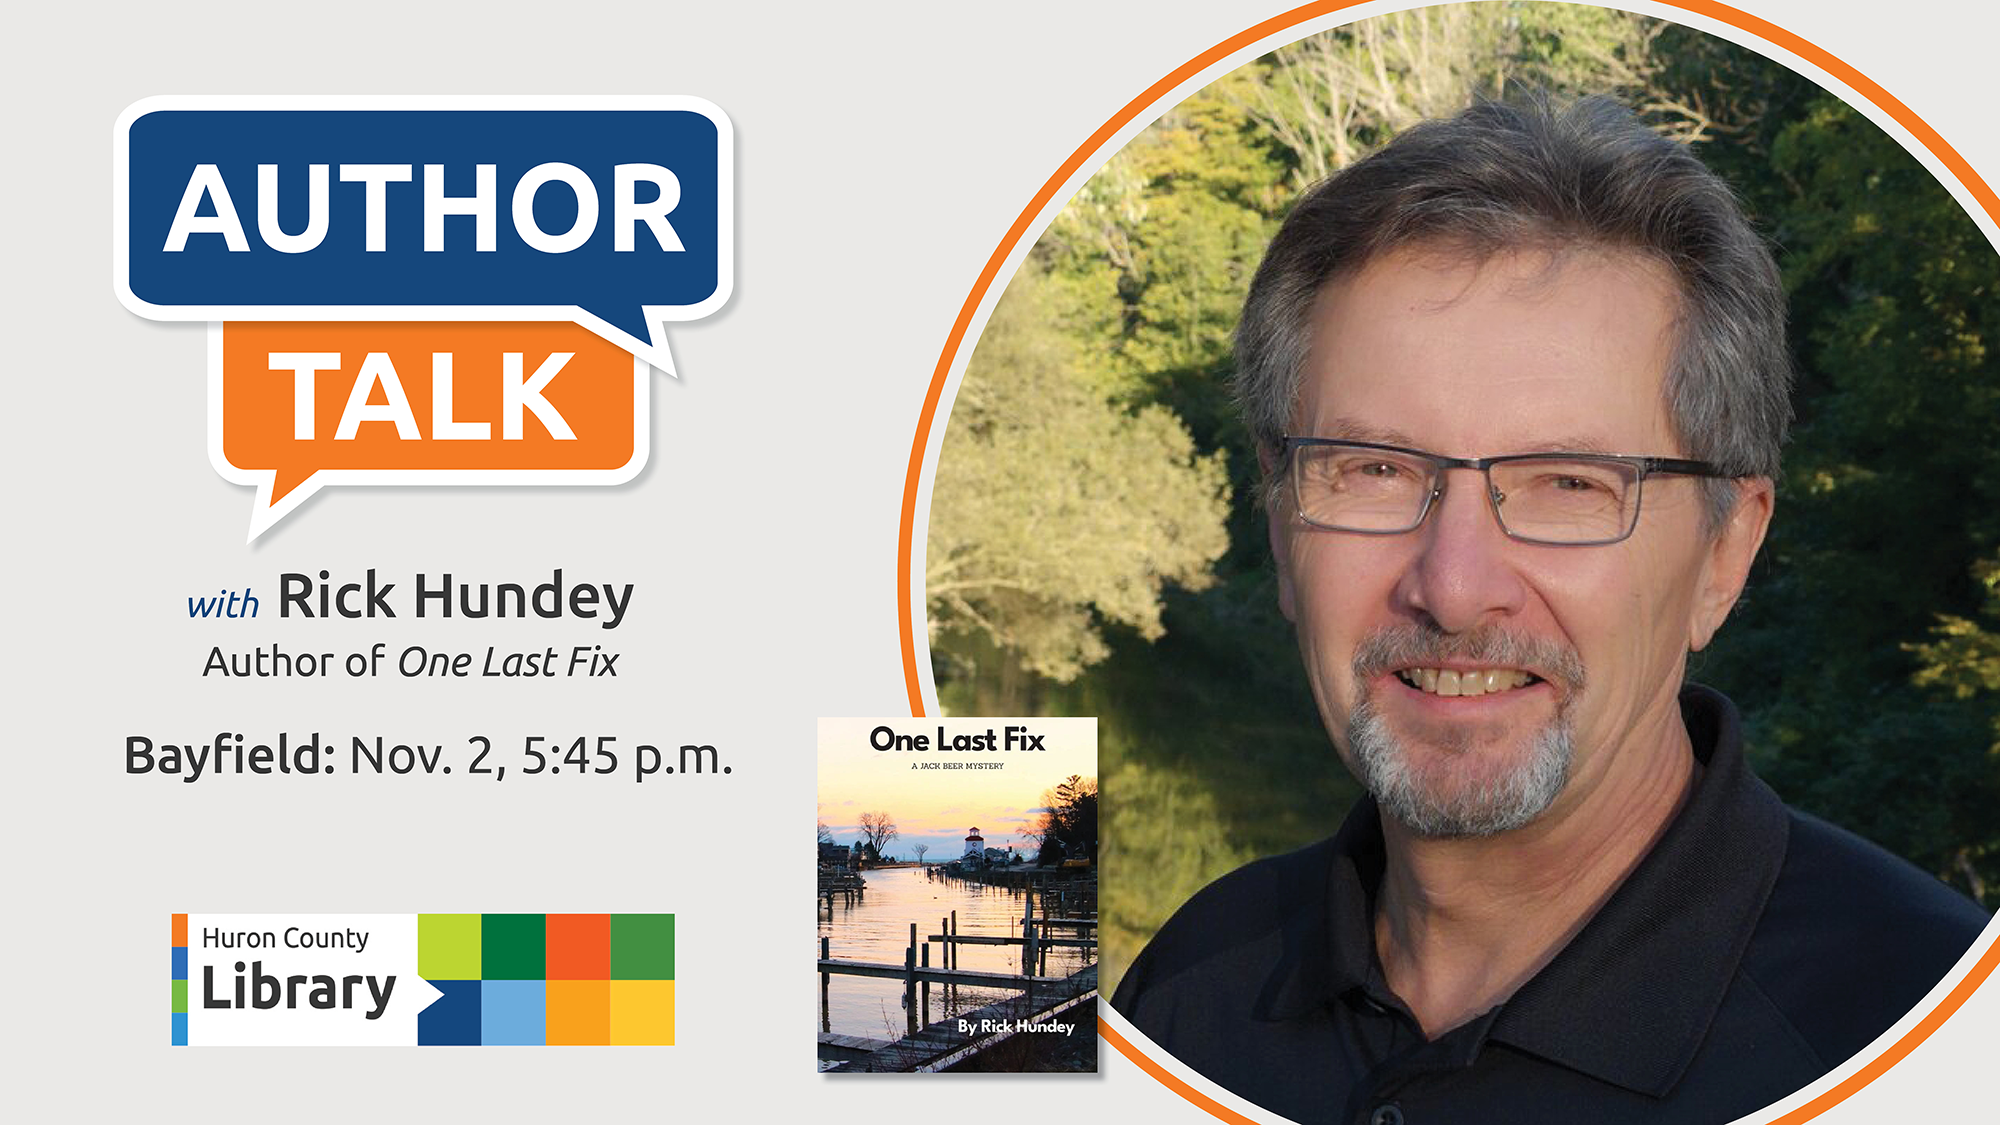 Image of local author Rick Hundey with text promoting his author talk at Bayfield Branch